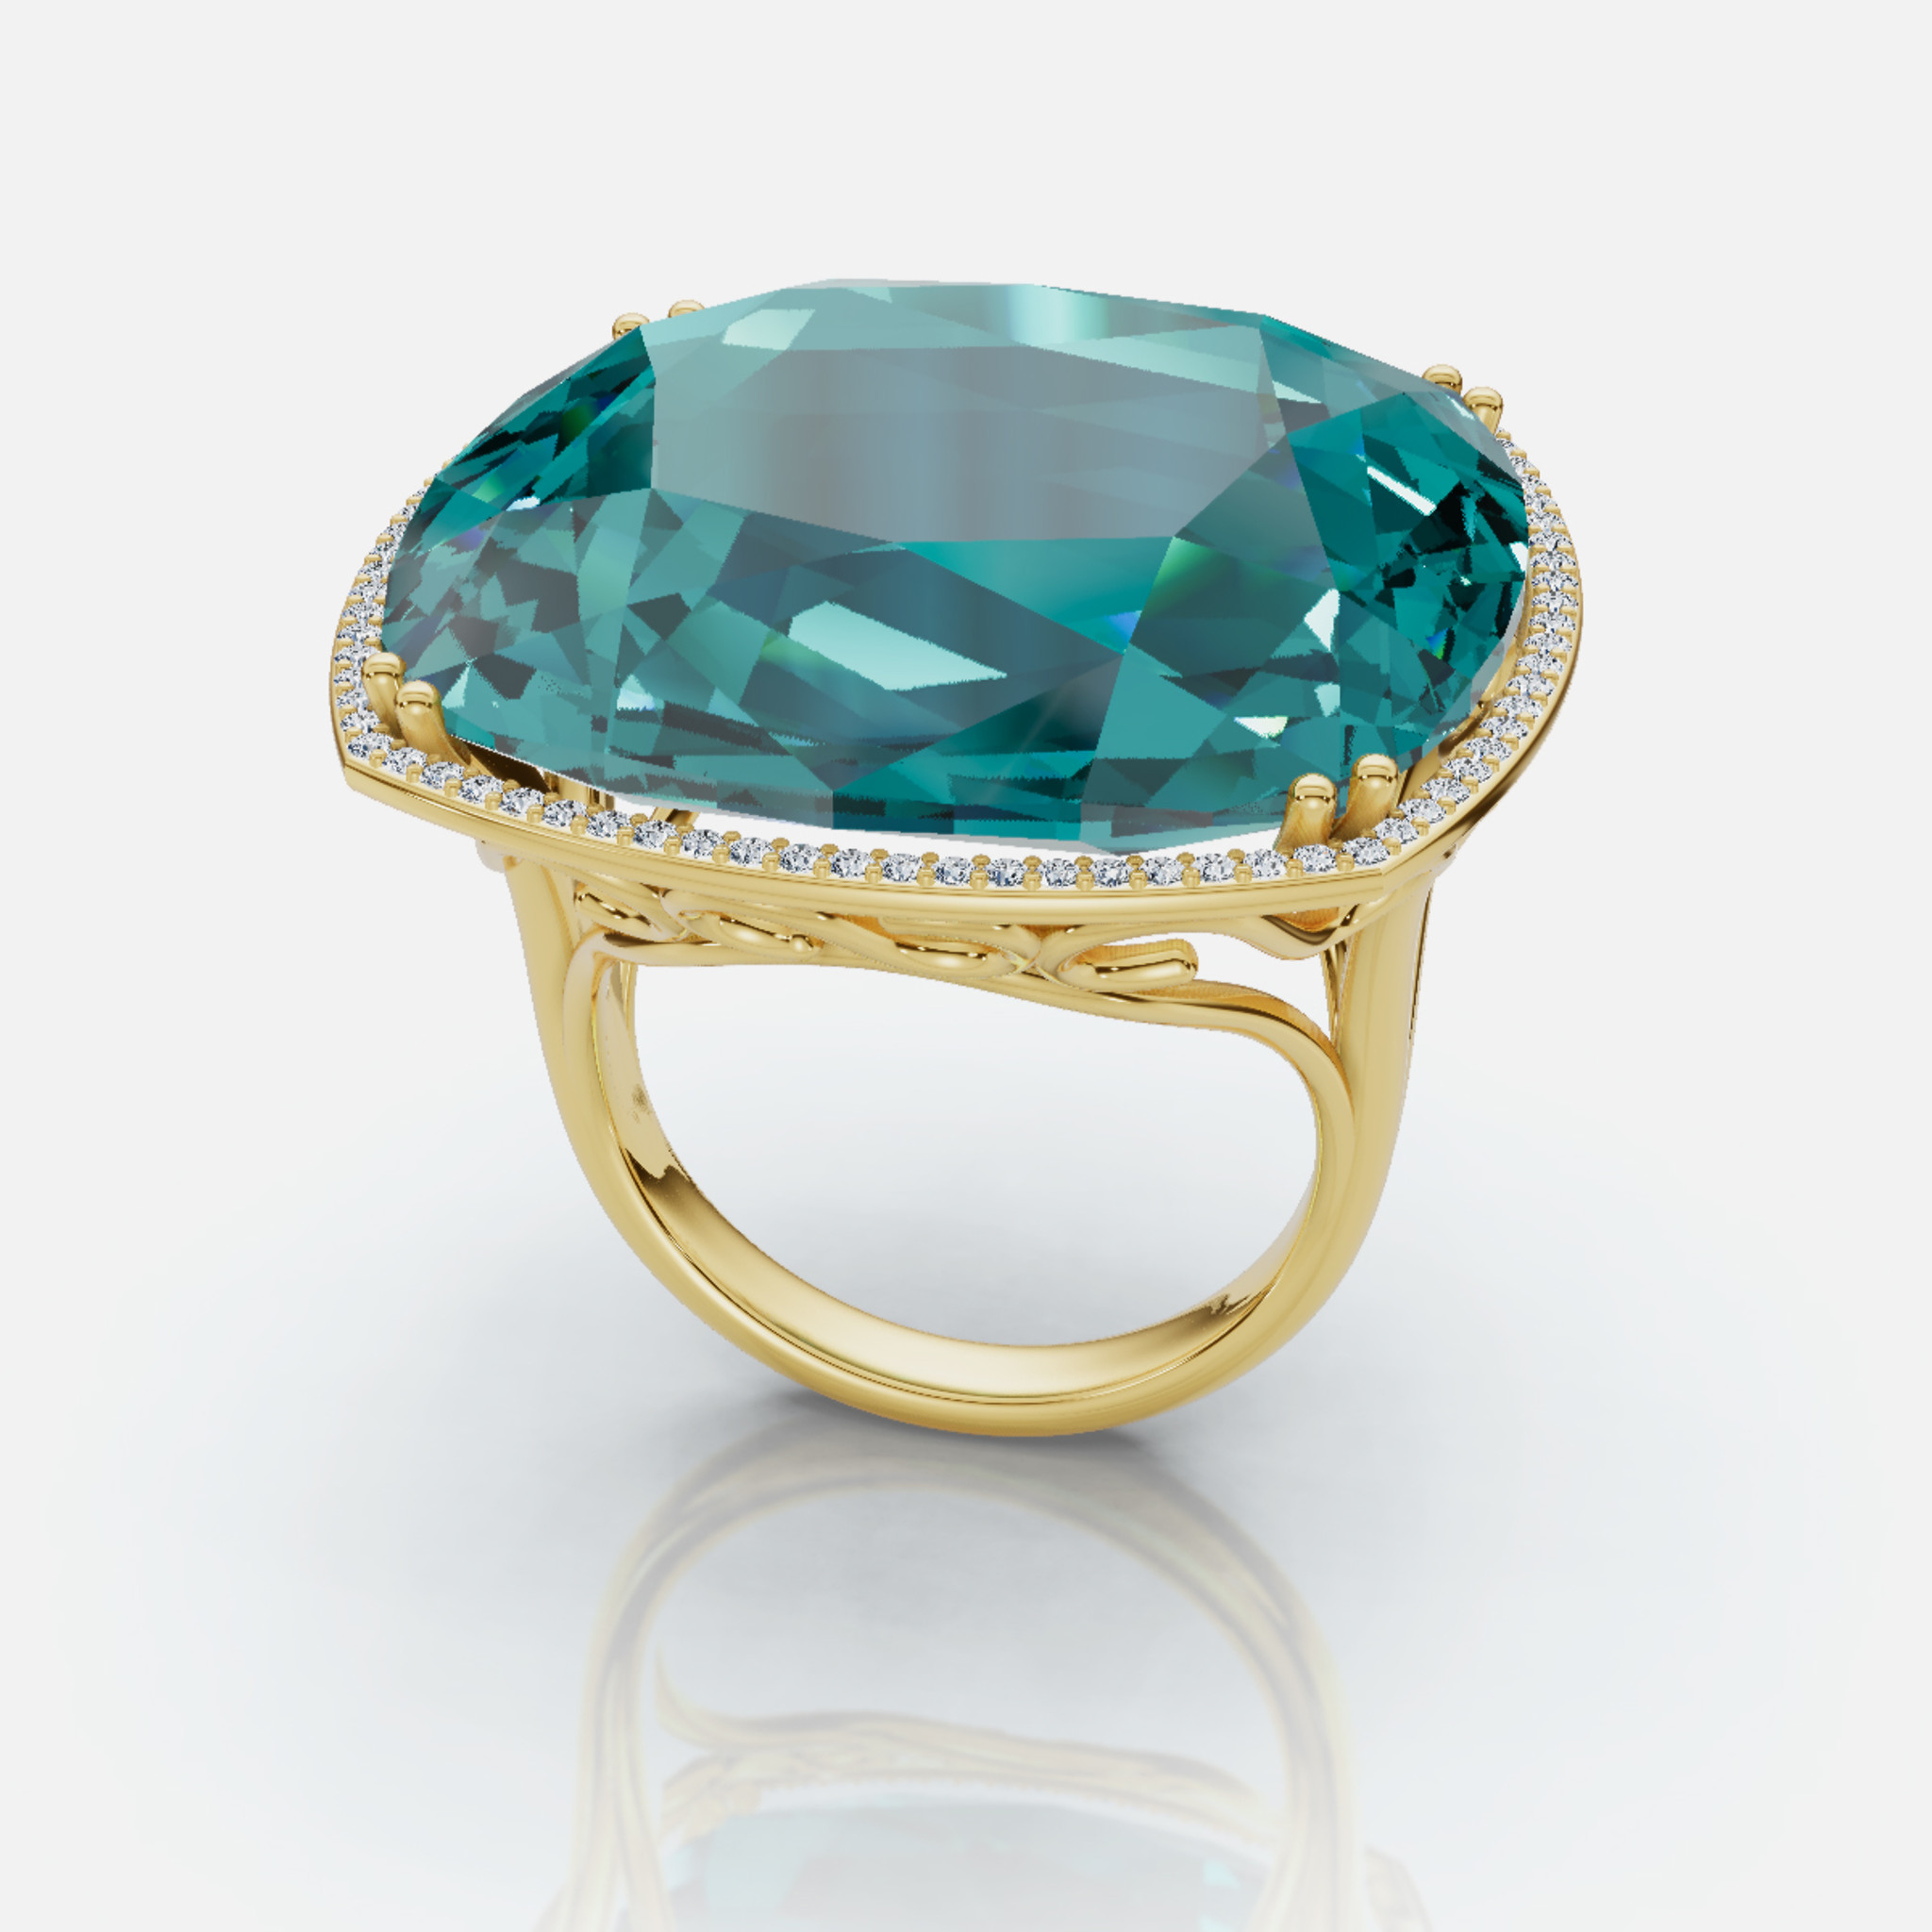 Side angle view of the 14K Gold Diamond Blue Topaz Statement Ring